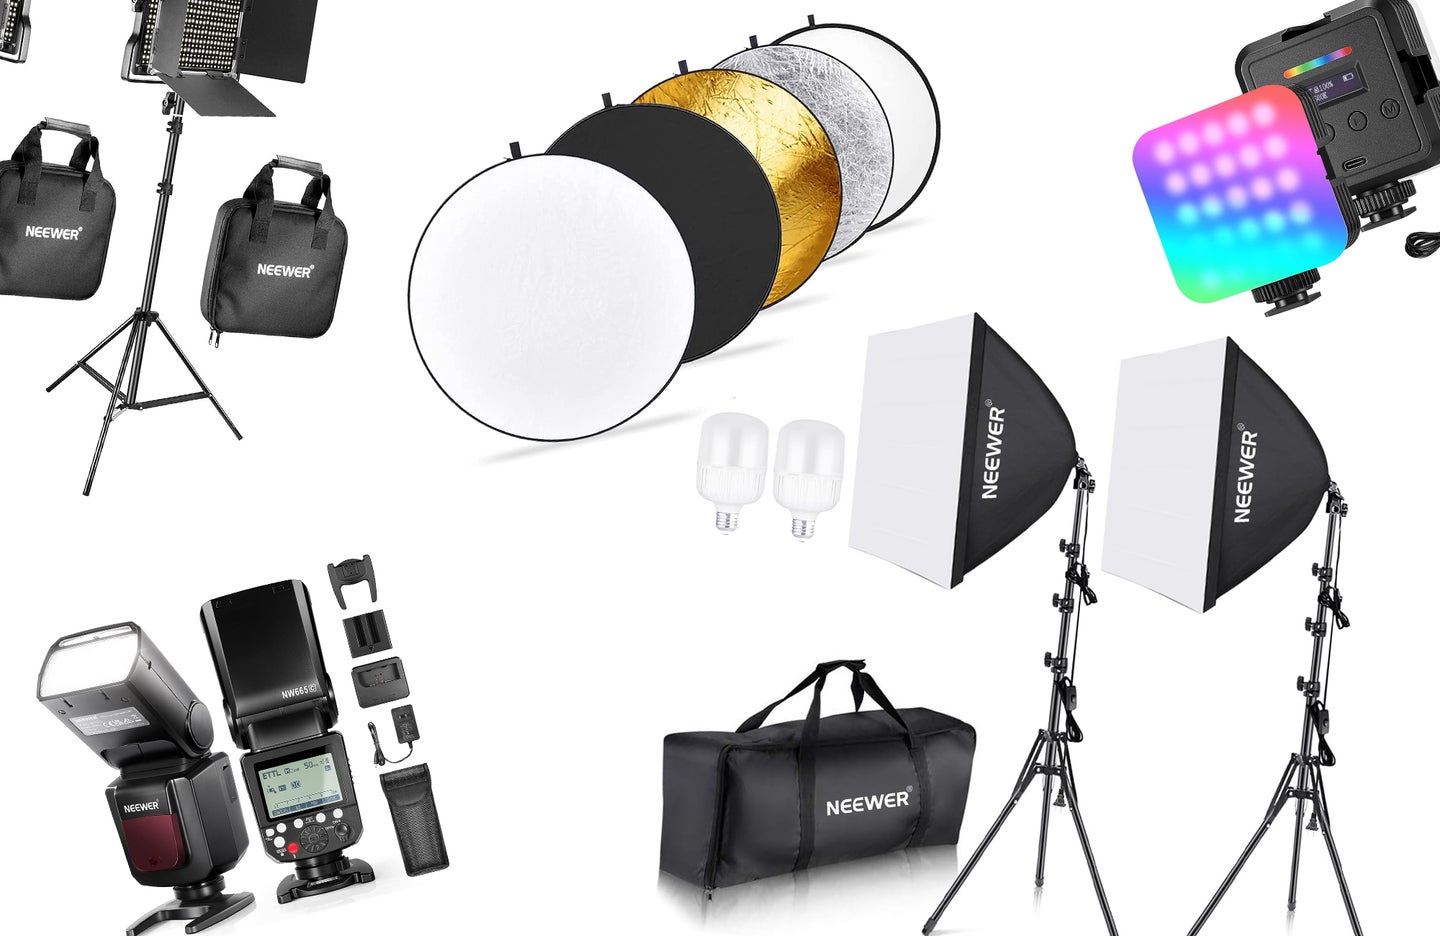 A selection of Neewer lighting products and accessories against a white background